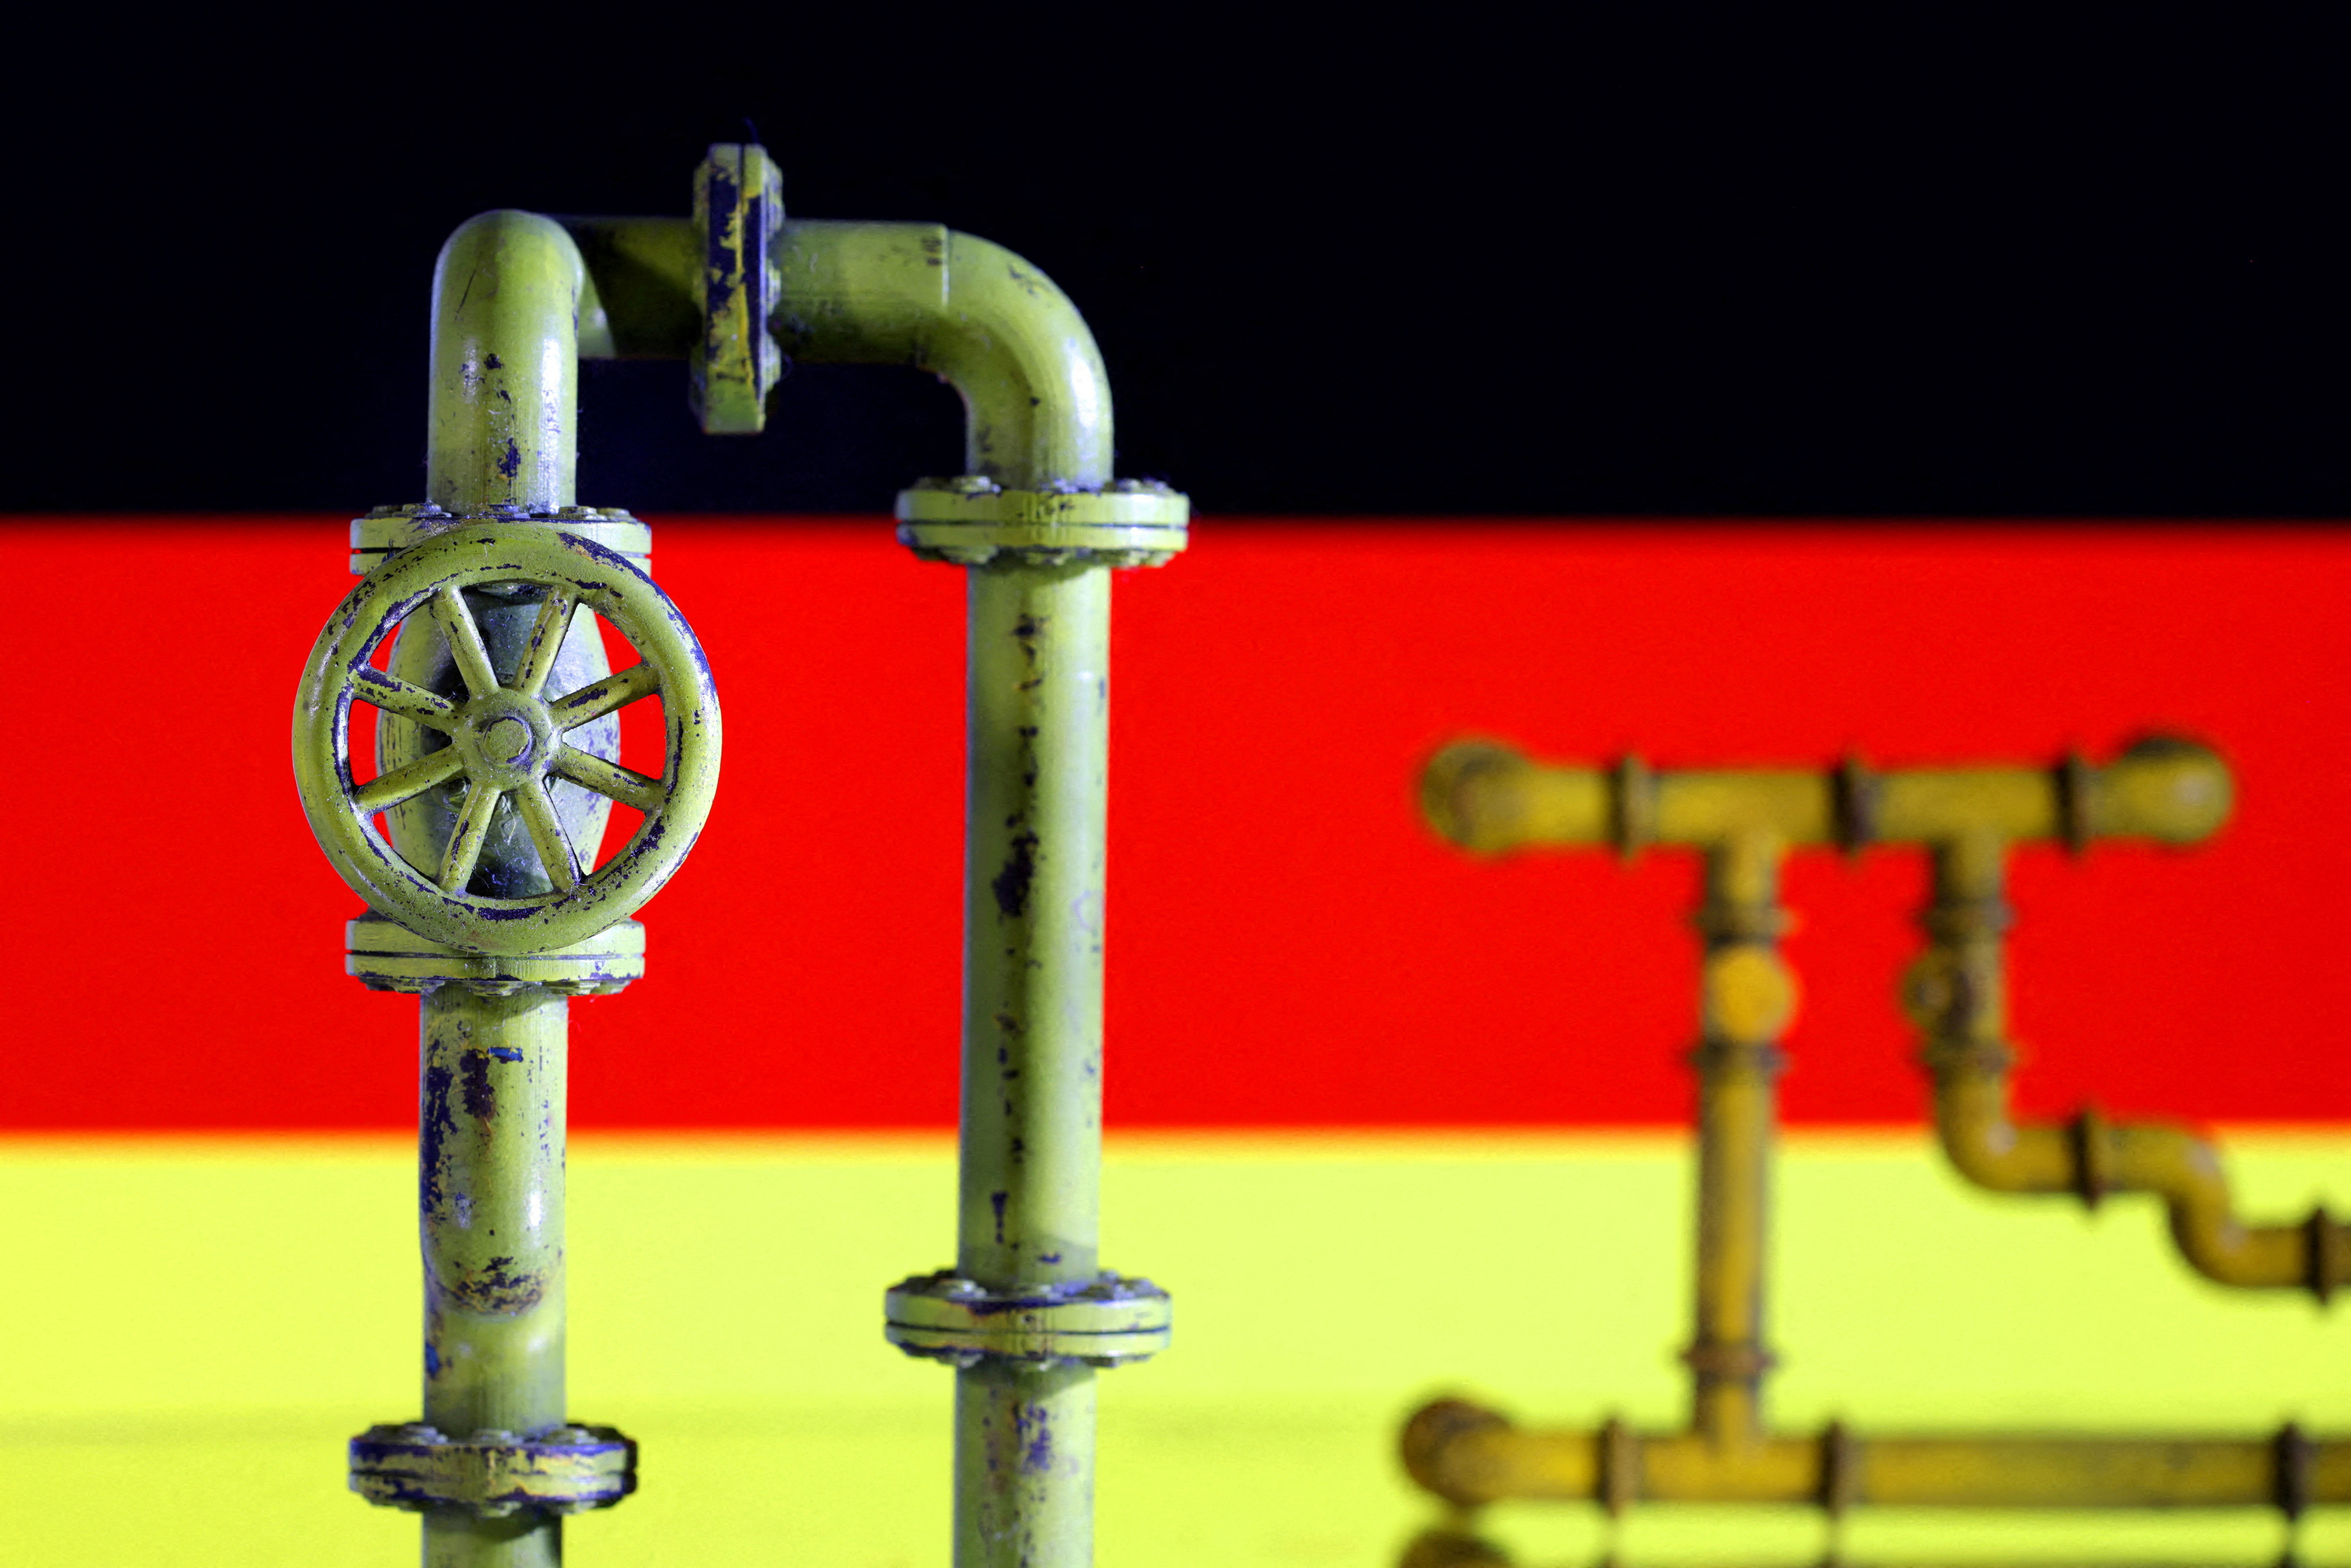 Illustration shows natural gas pipeline and German flag